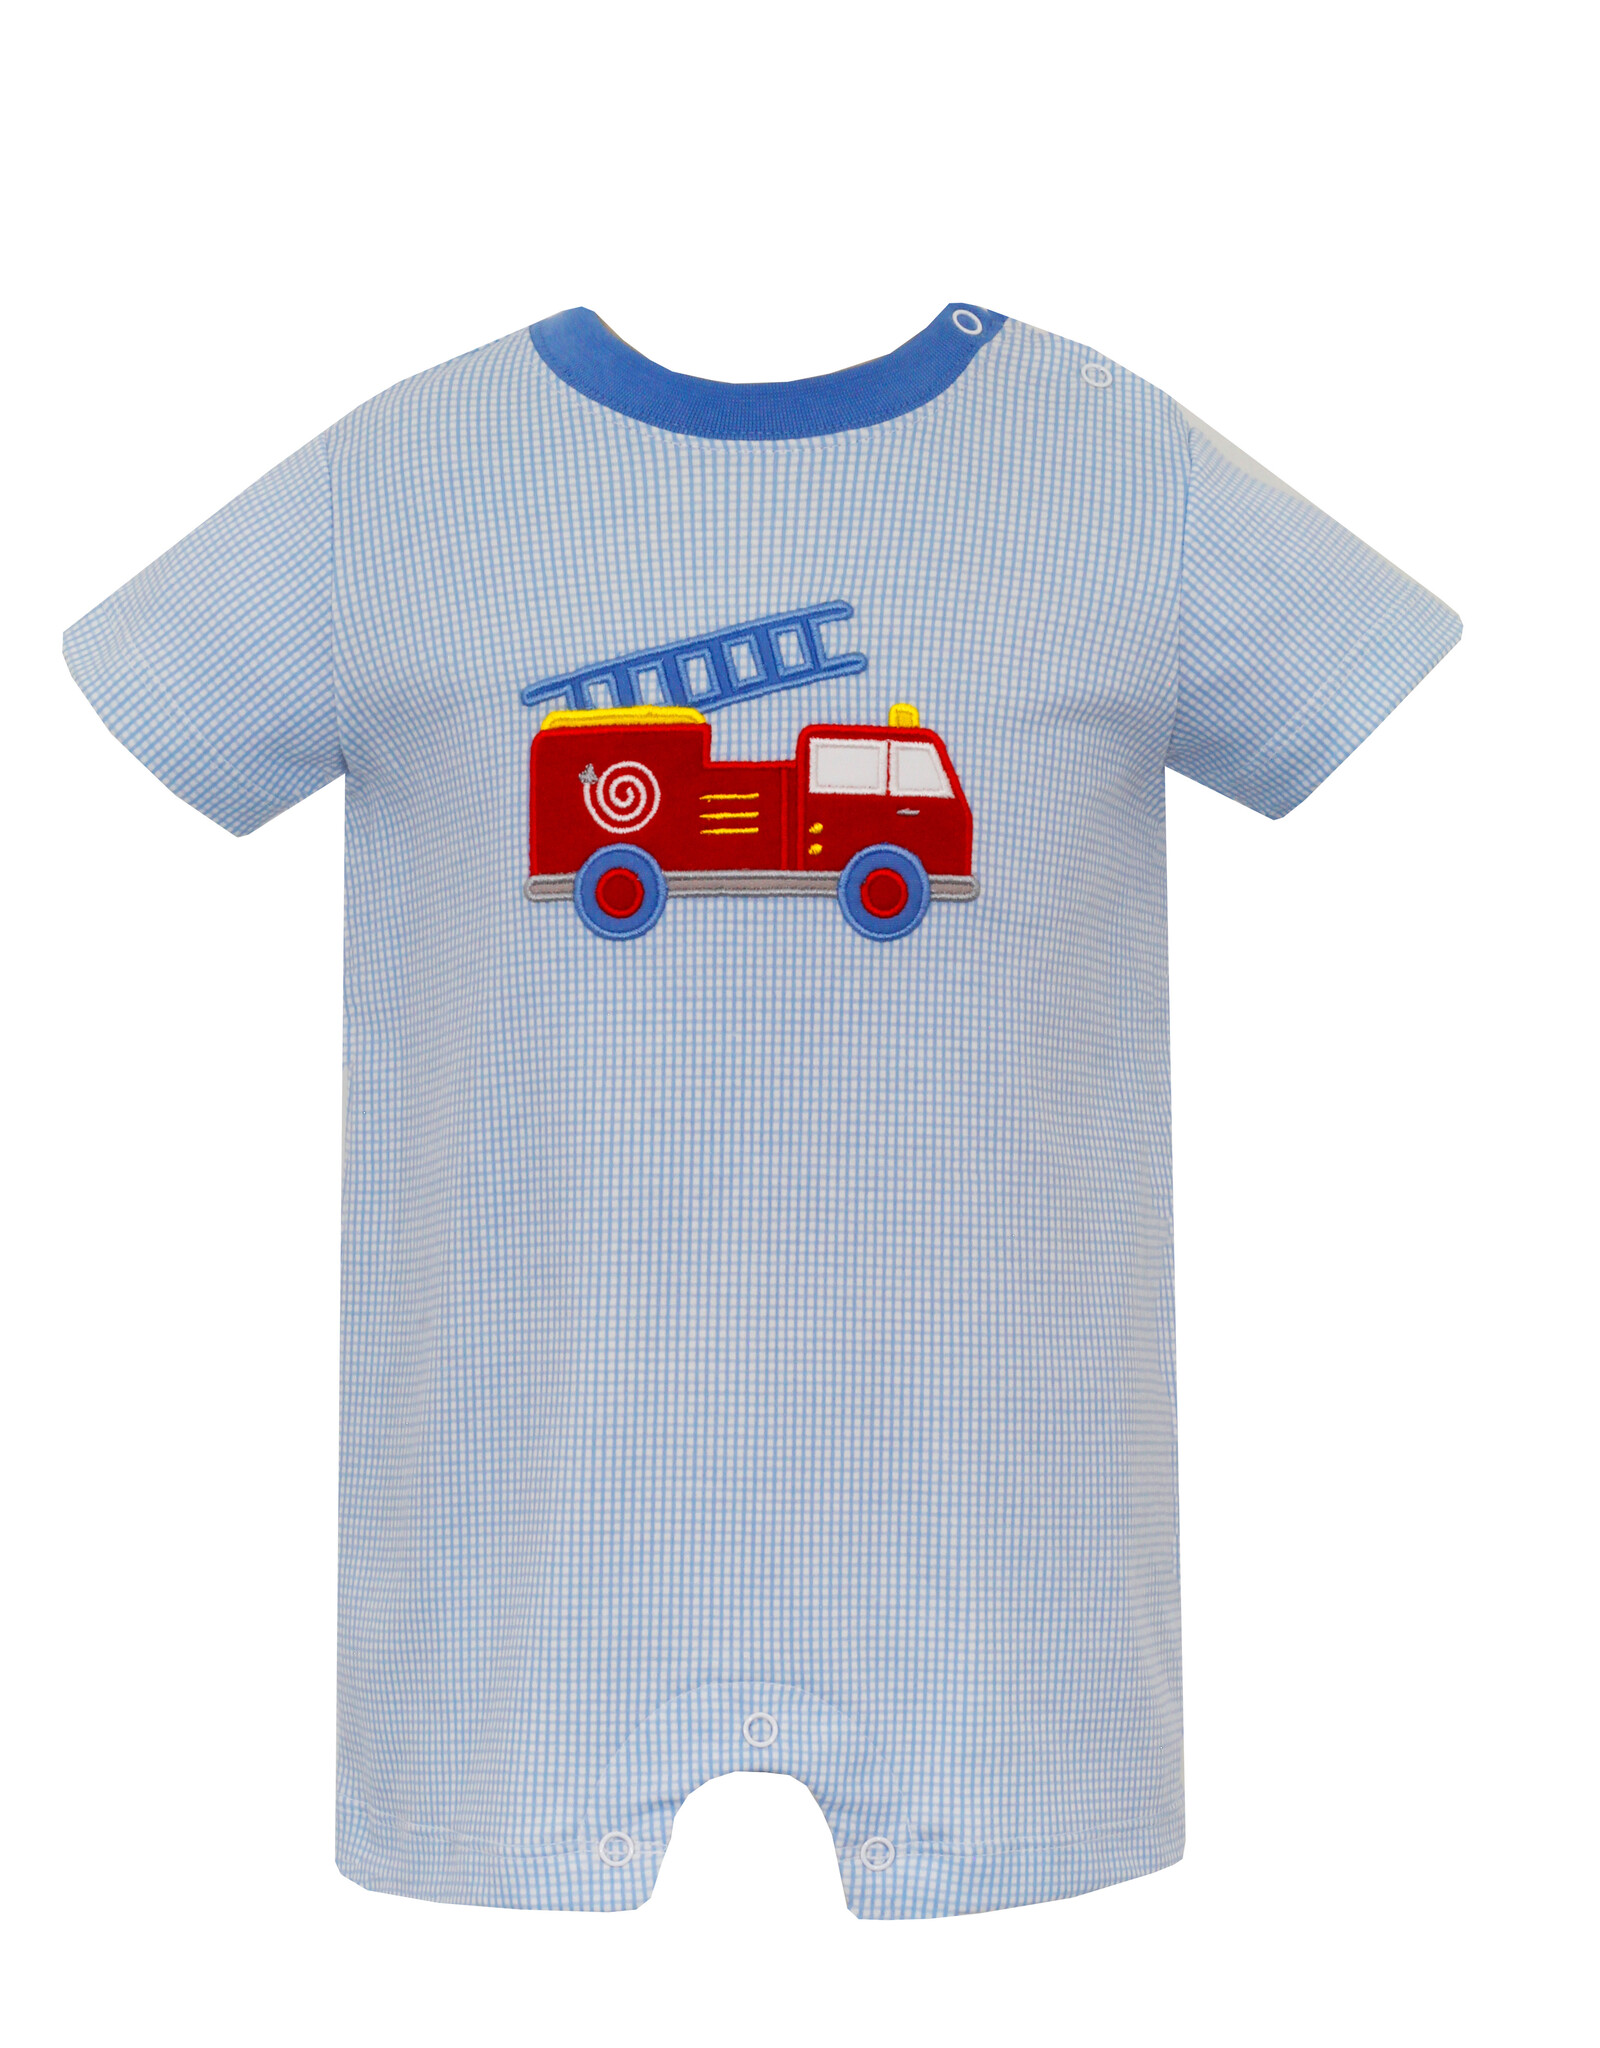 Claire and Charlie FIRETRUCK- boy's romper